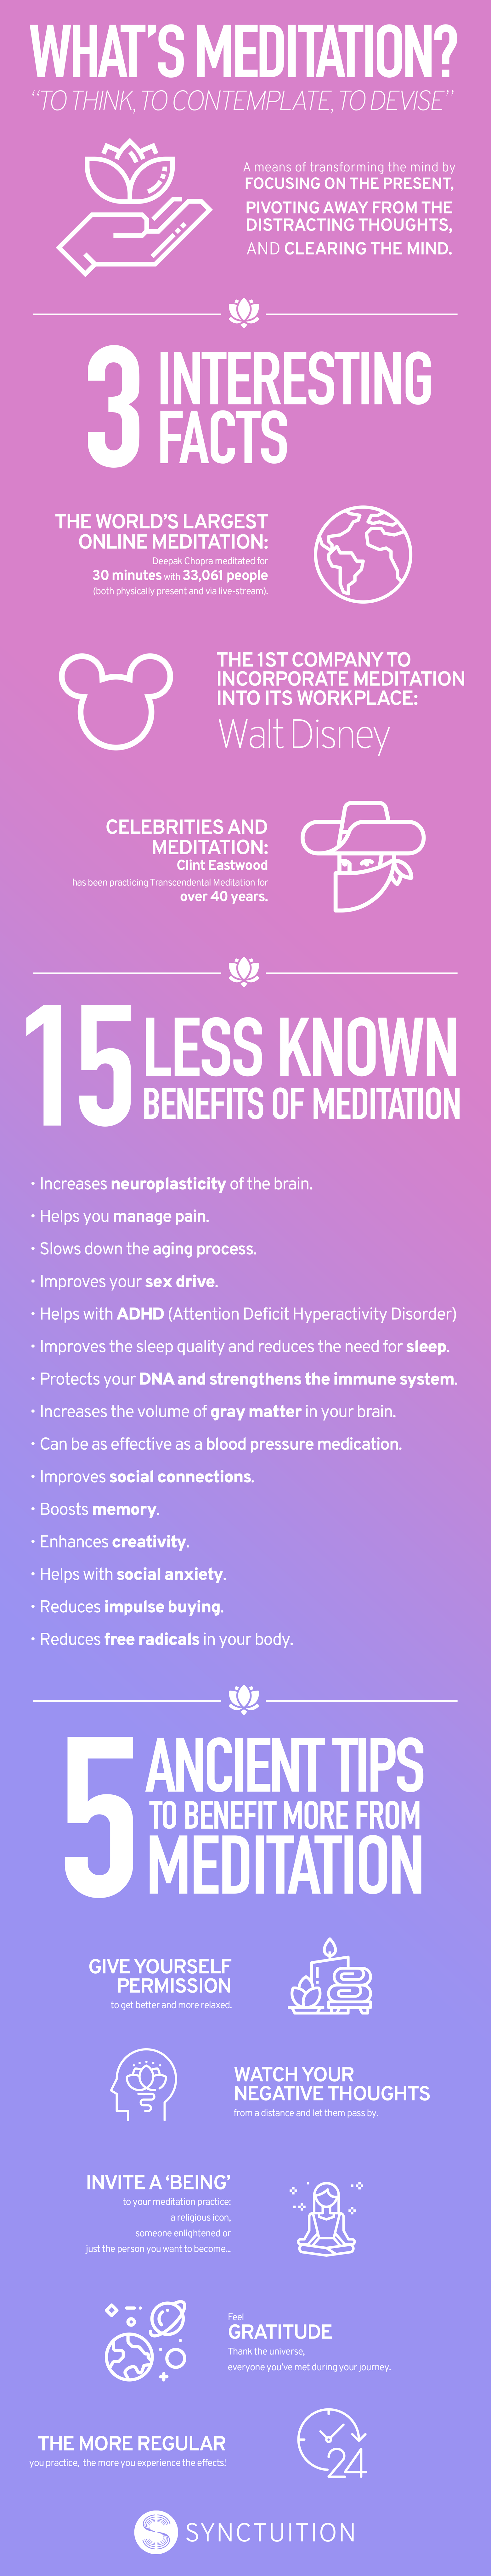 Infographic on what meditation is, 5 ancient tips for meditation and interesting facts about benefits of meditation